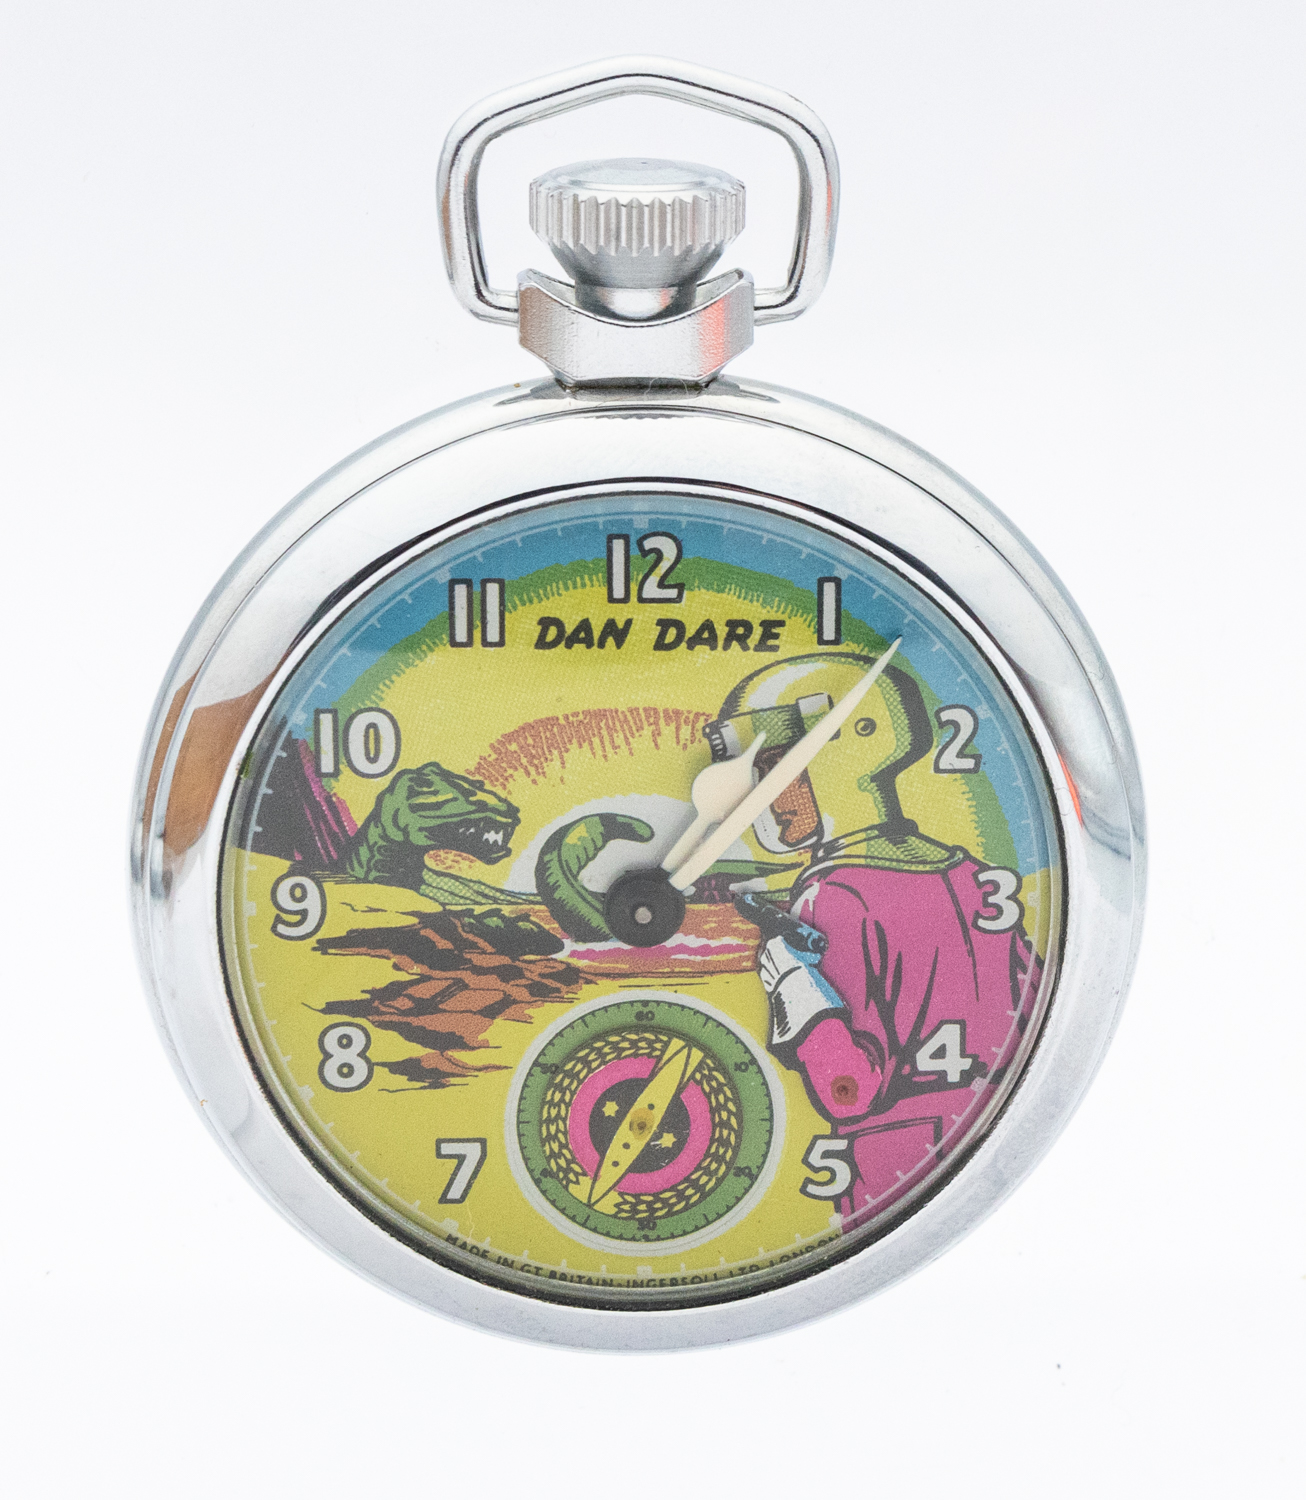 Ingersoll- a Dan Dare automation chrome cased pocket watch, circa 1950's, case approx 50mm, with